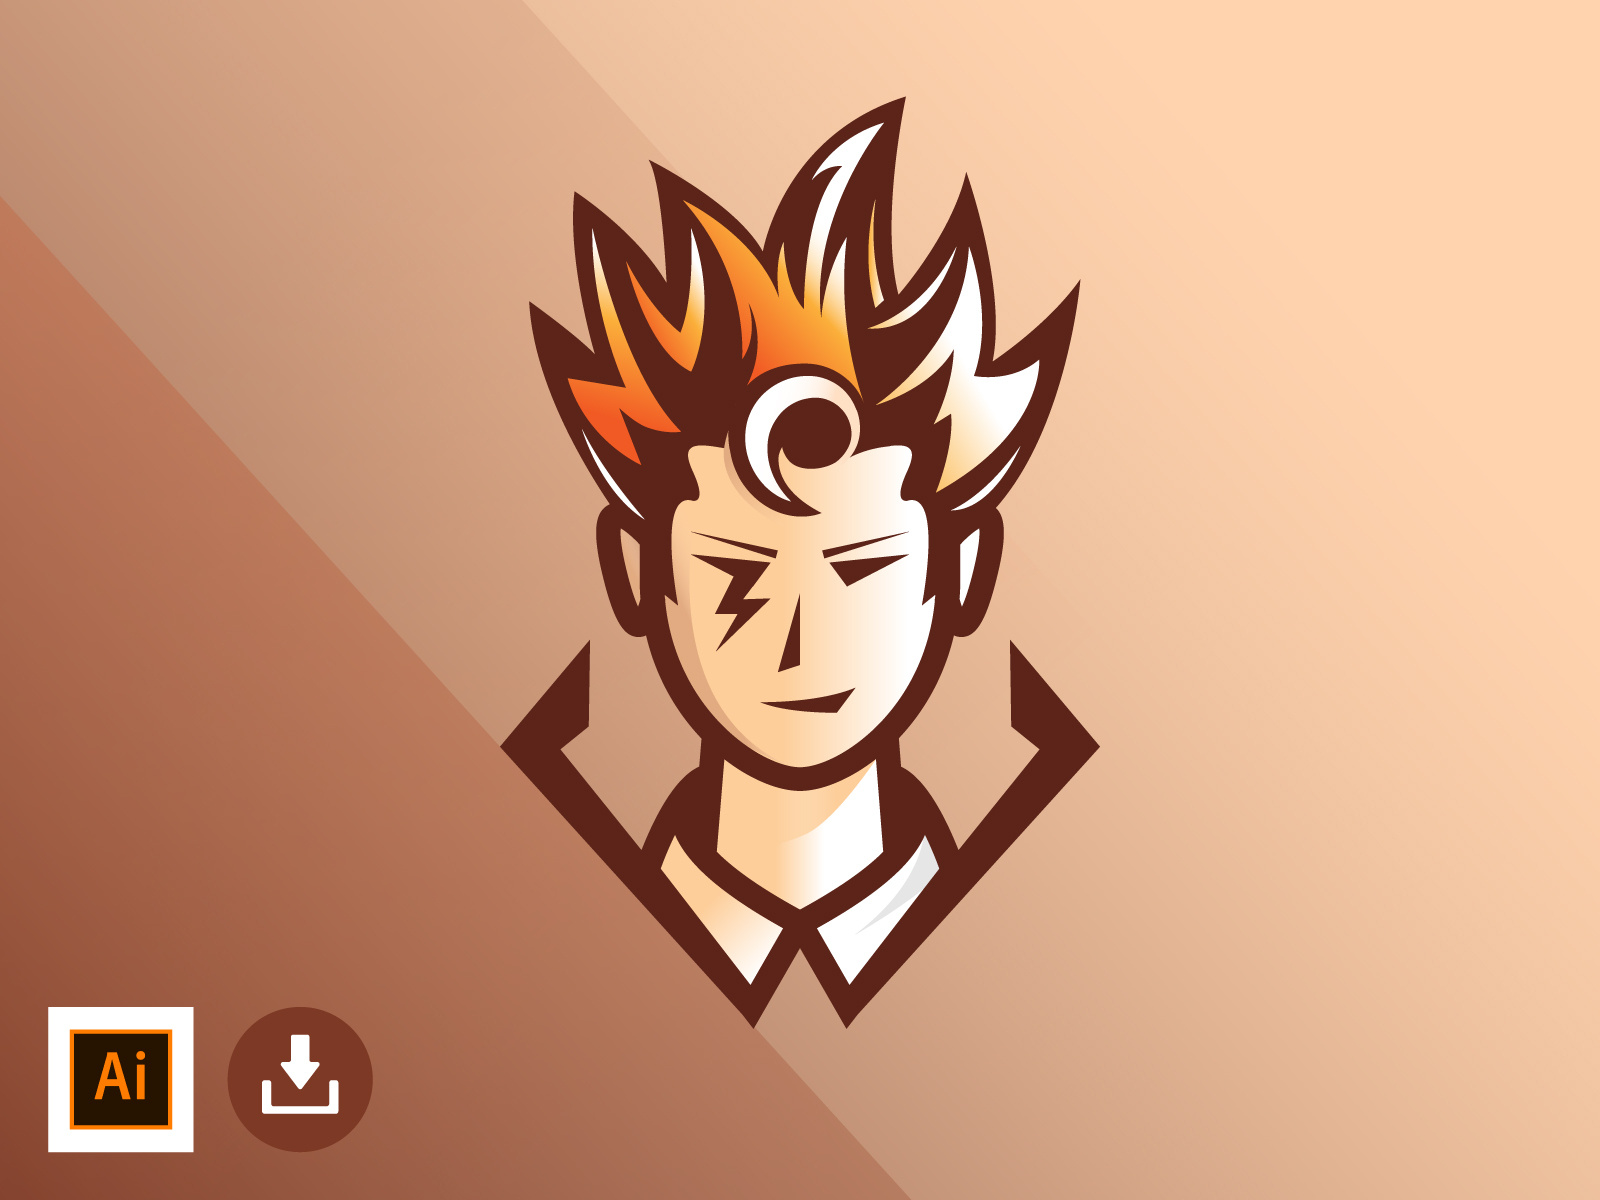 Design awesome esport twitch youtube avatar gaming logo by Semidesigner93   Fiverr